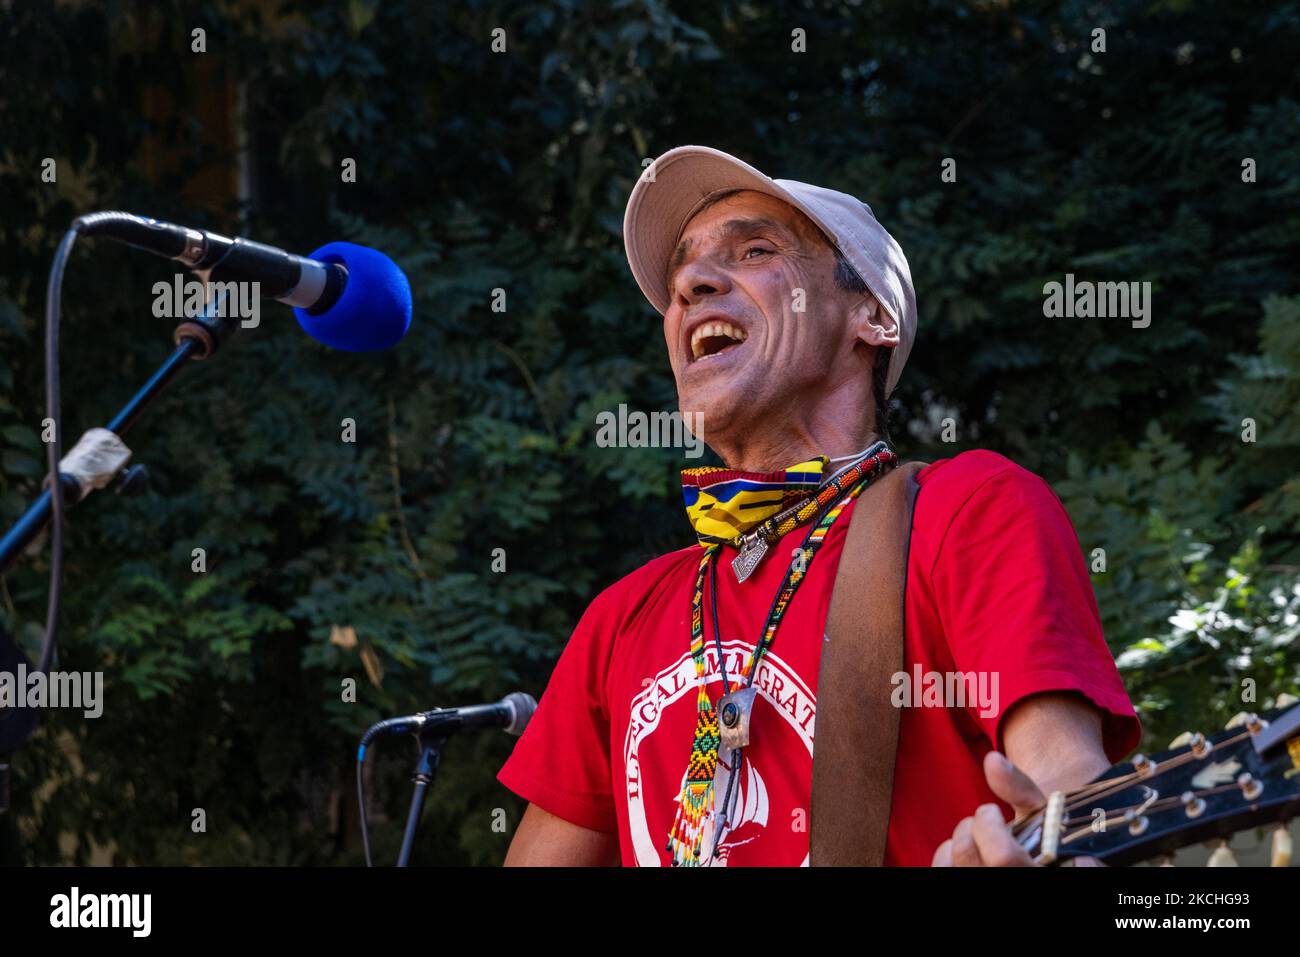 The musician Manu Chao takes part in the demonstration in Piazza Alimonda. Twenty years after the G8 and the brutal repression of the anti-globalization movement, People gathered in Piazza Alimonda, in Turin, Italy, on July 20, 2021, where Carlo Giuliani was killed, in a pacific demonstration. That is a part of initiatives and events for the twentieth anniversary of the Genoa G8 held in July 2001, when the anti-globalization movement was violently repressed by the police and the young activist, Carlo Giuliani was killed. (Photo by Mauro Ujetto/NurPhoto) Stock Photo